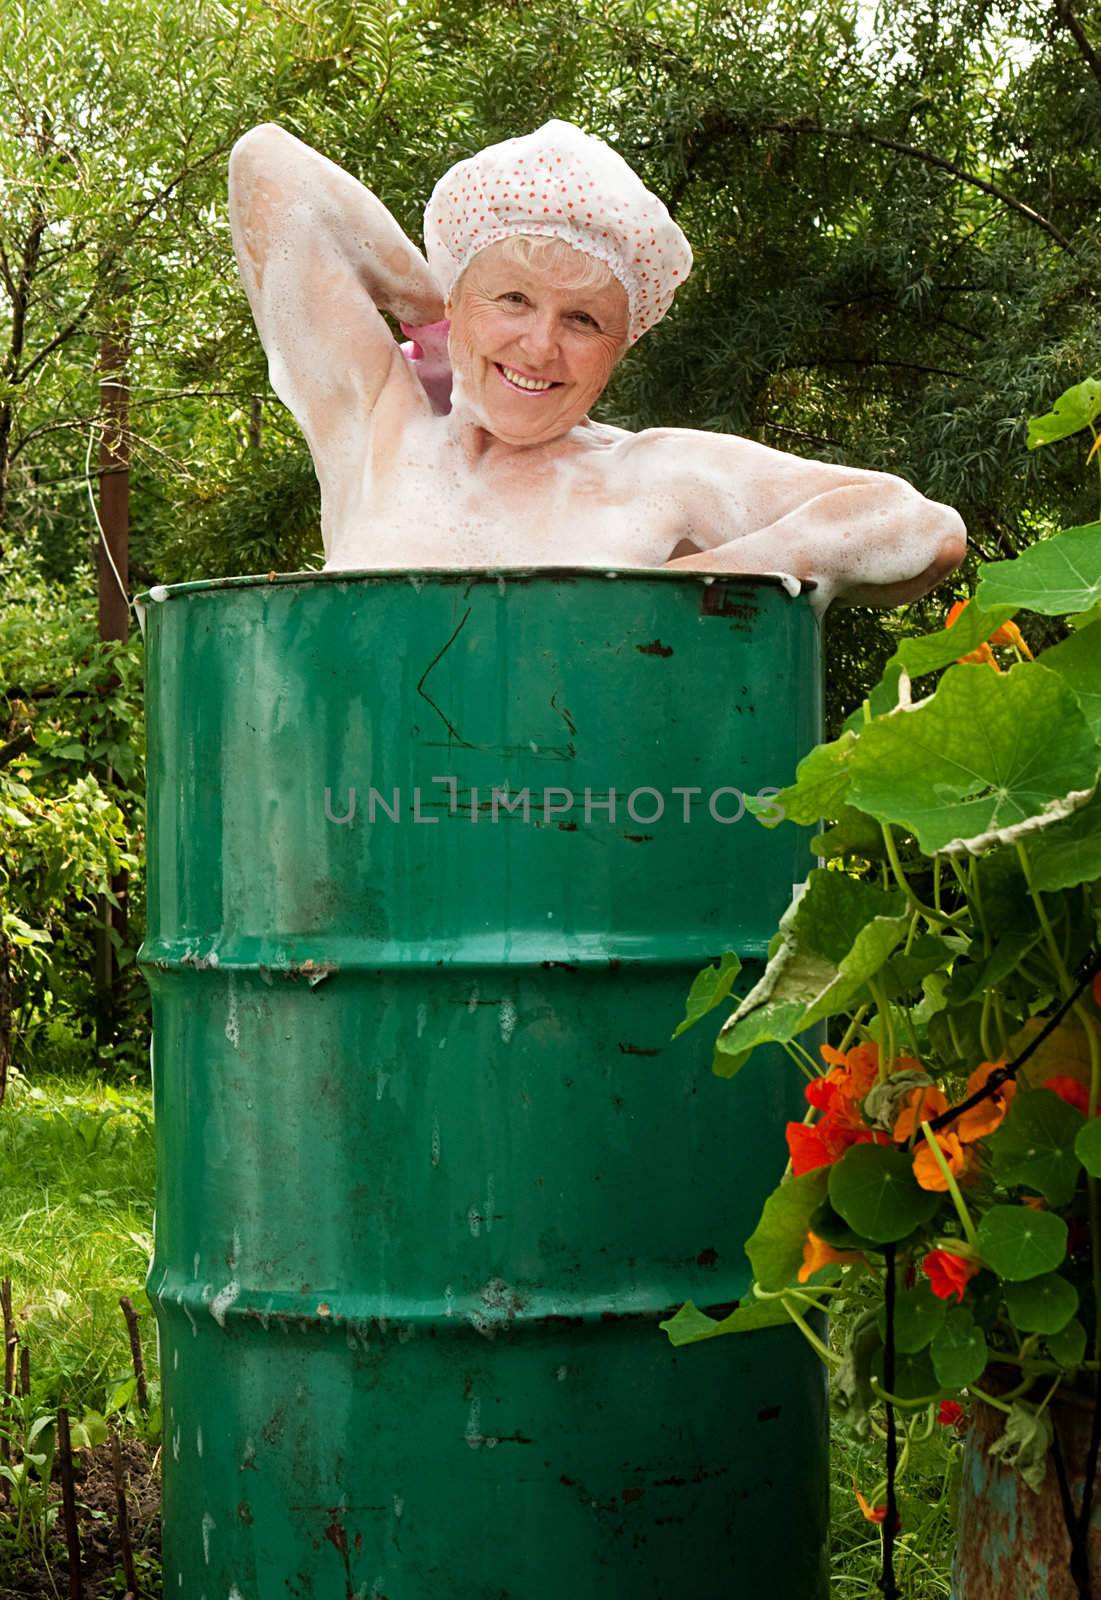 
The elderly woman washes in the cask
